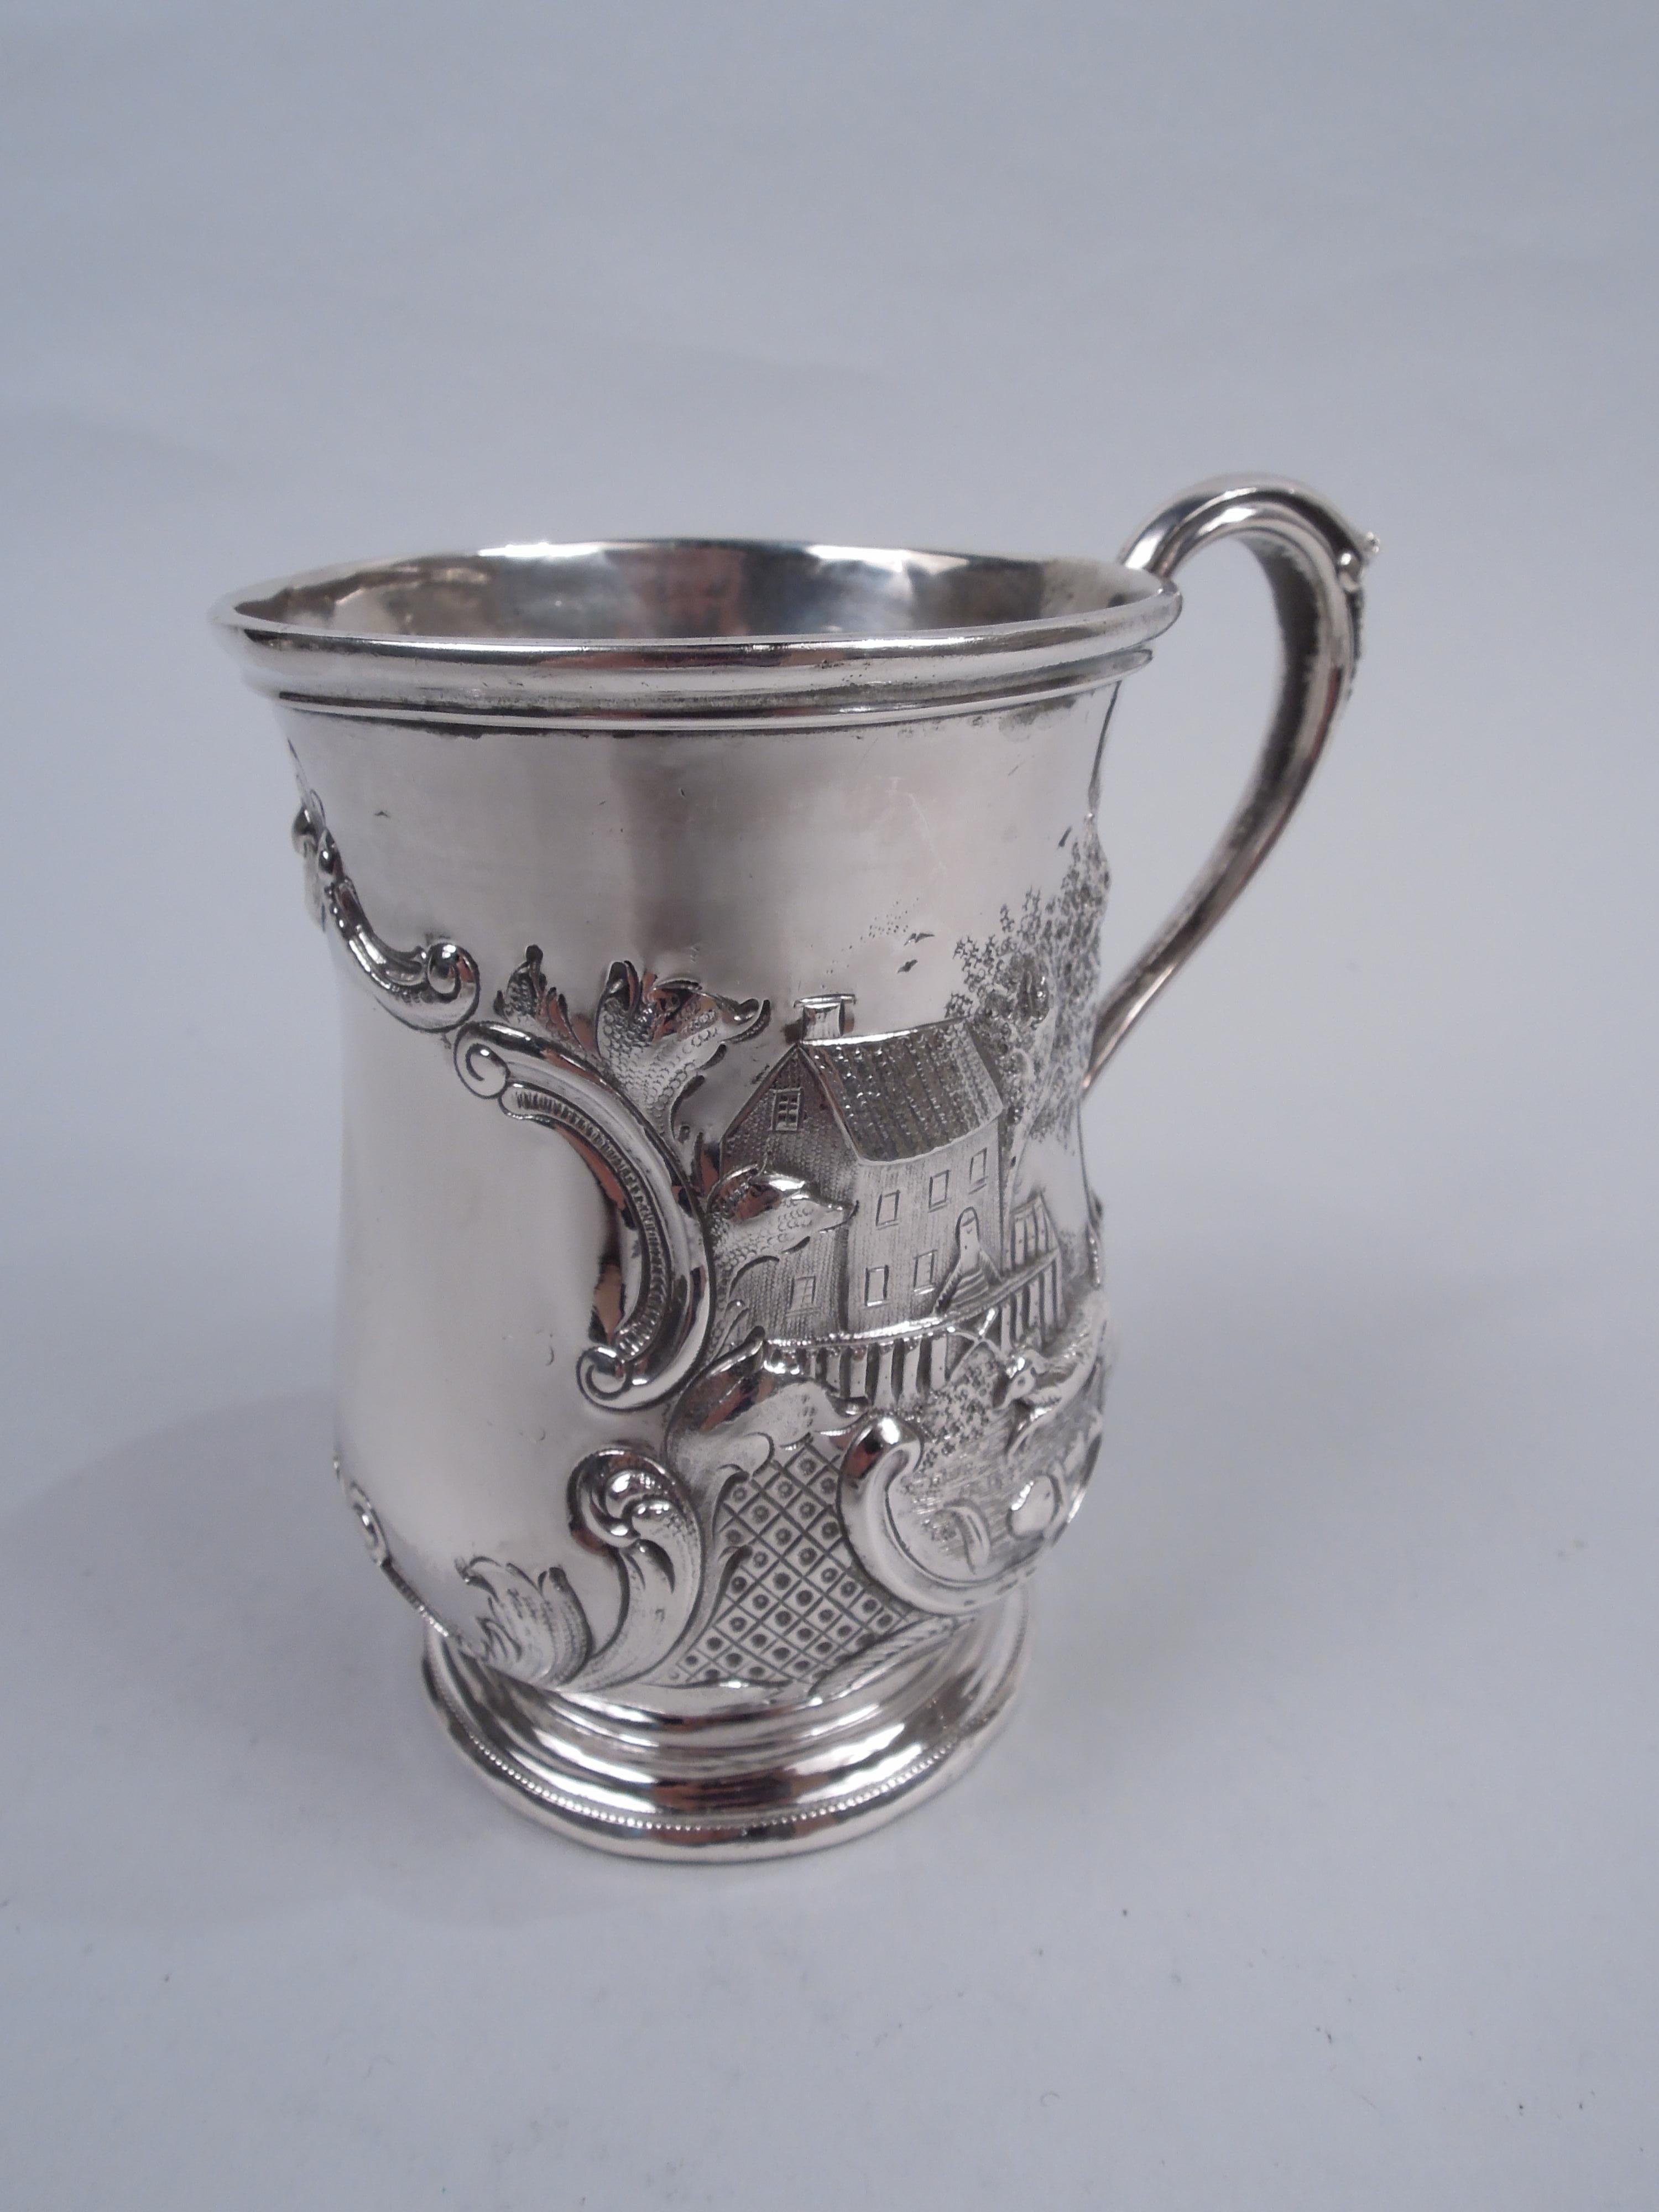 Classical coin silver christening mug, ca 1850. Baluster bowl with high-looping leaf-capped s-scroll handle and round stepped foot. Large scrolled frame (vacant) surrounded by rural idyll with house and barn set in bosky landscape. In foreground a